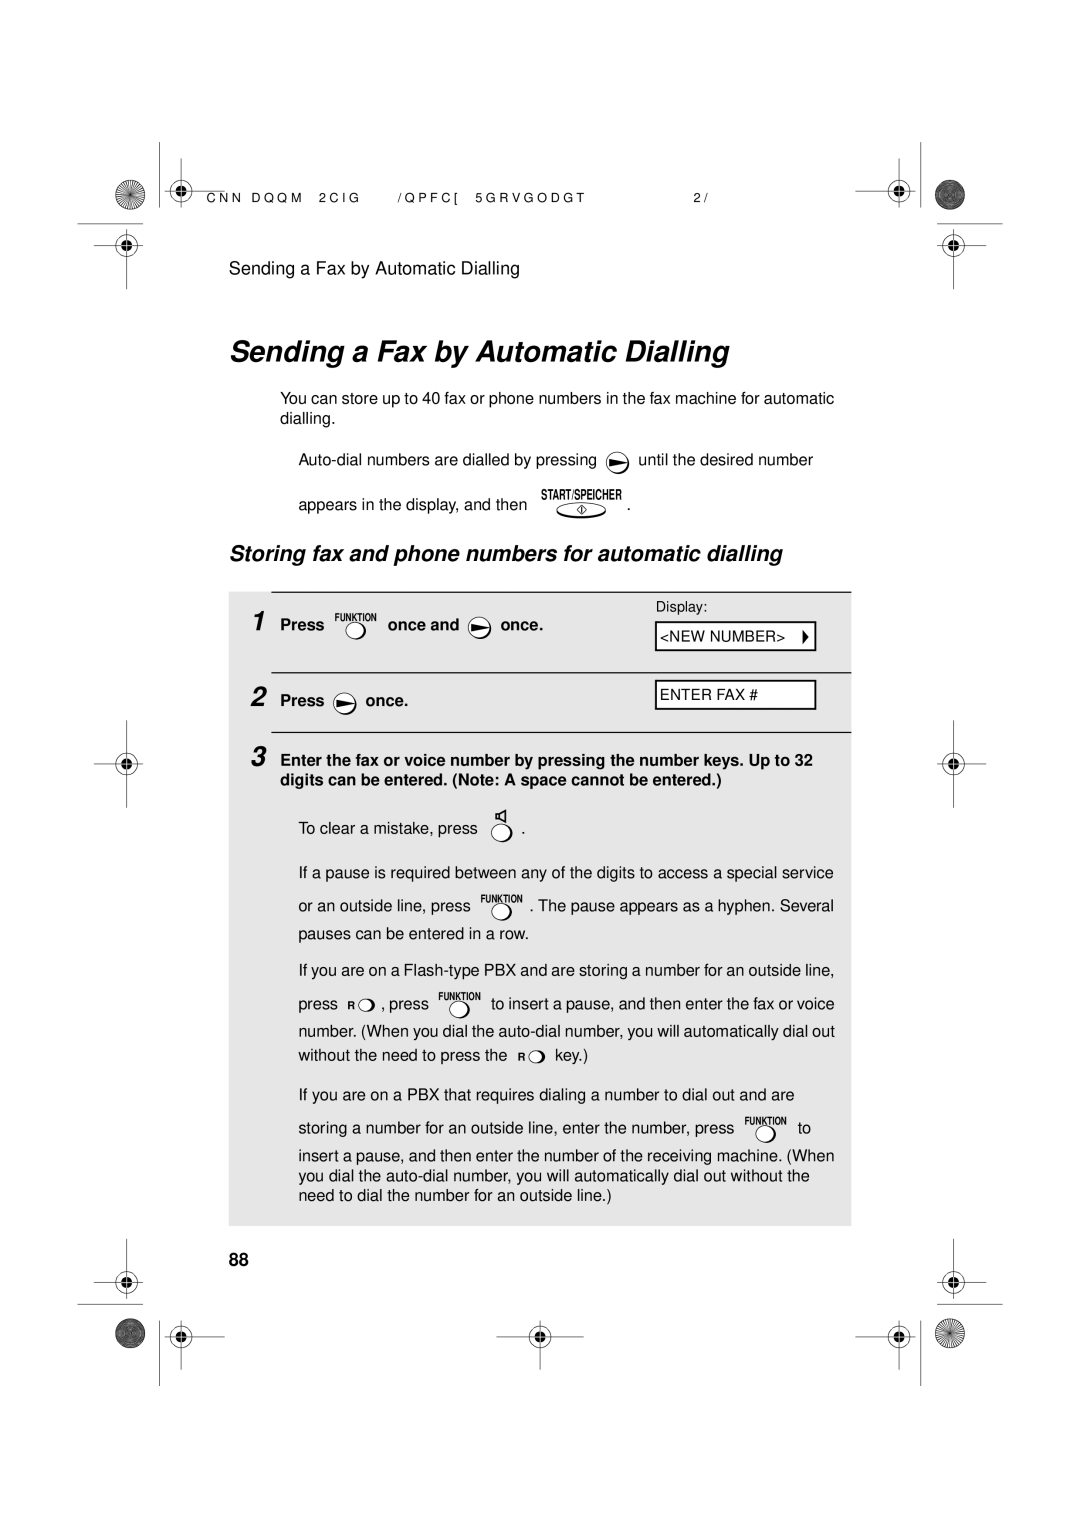 Sharp UX-D50 manual Sending a Fax by Automatic Dialling, Storing fax and phone numbers for automatic dialling 